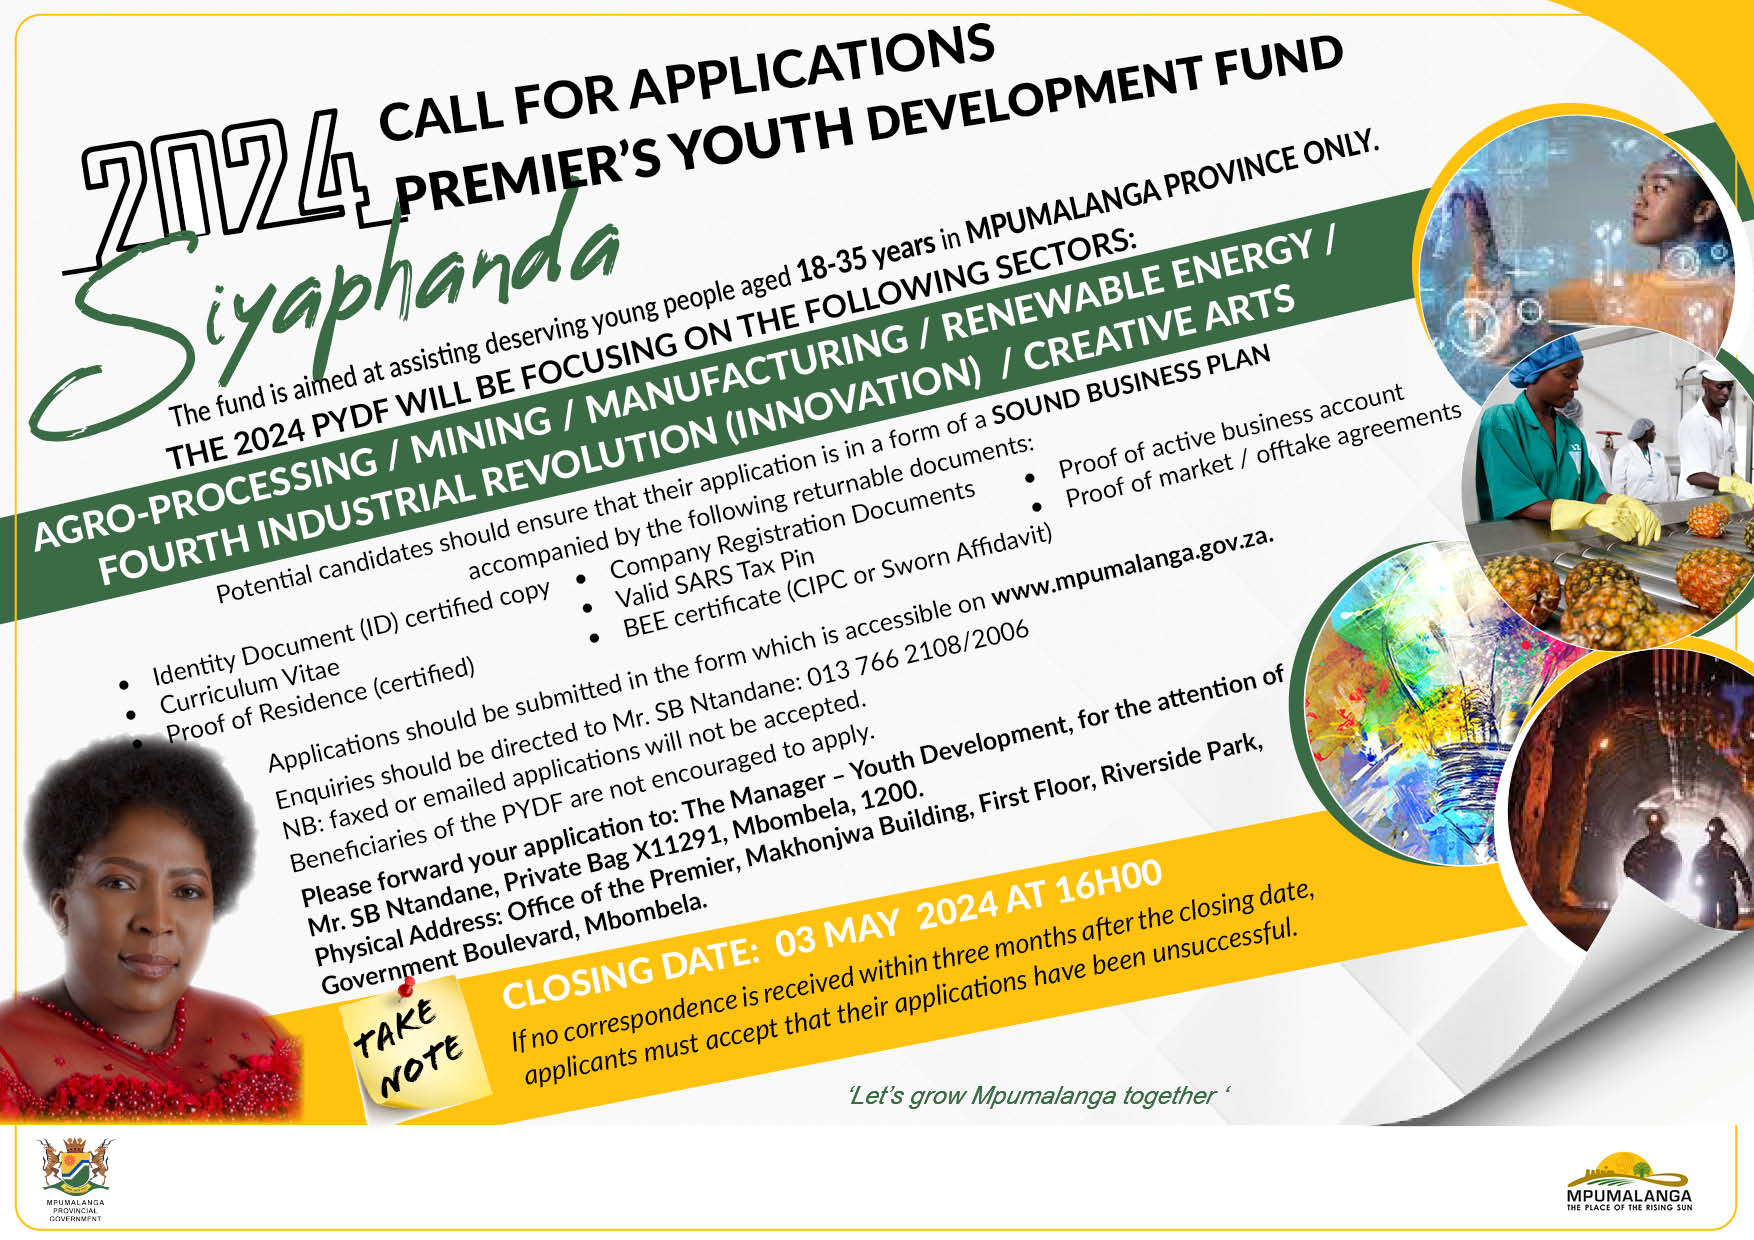 2024 Call for applications for the Premier's Youth Development Fund